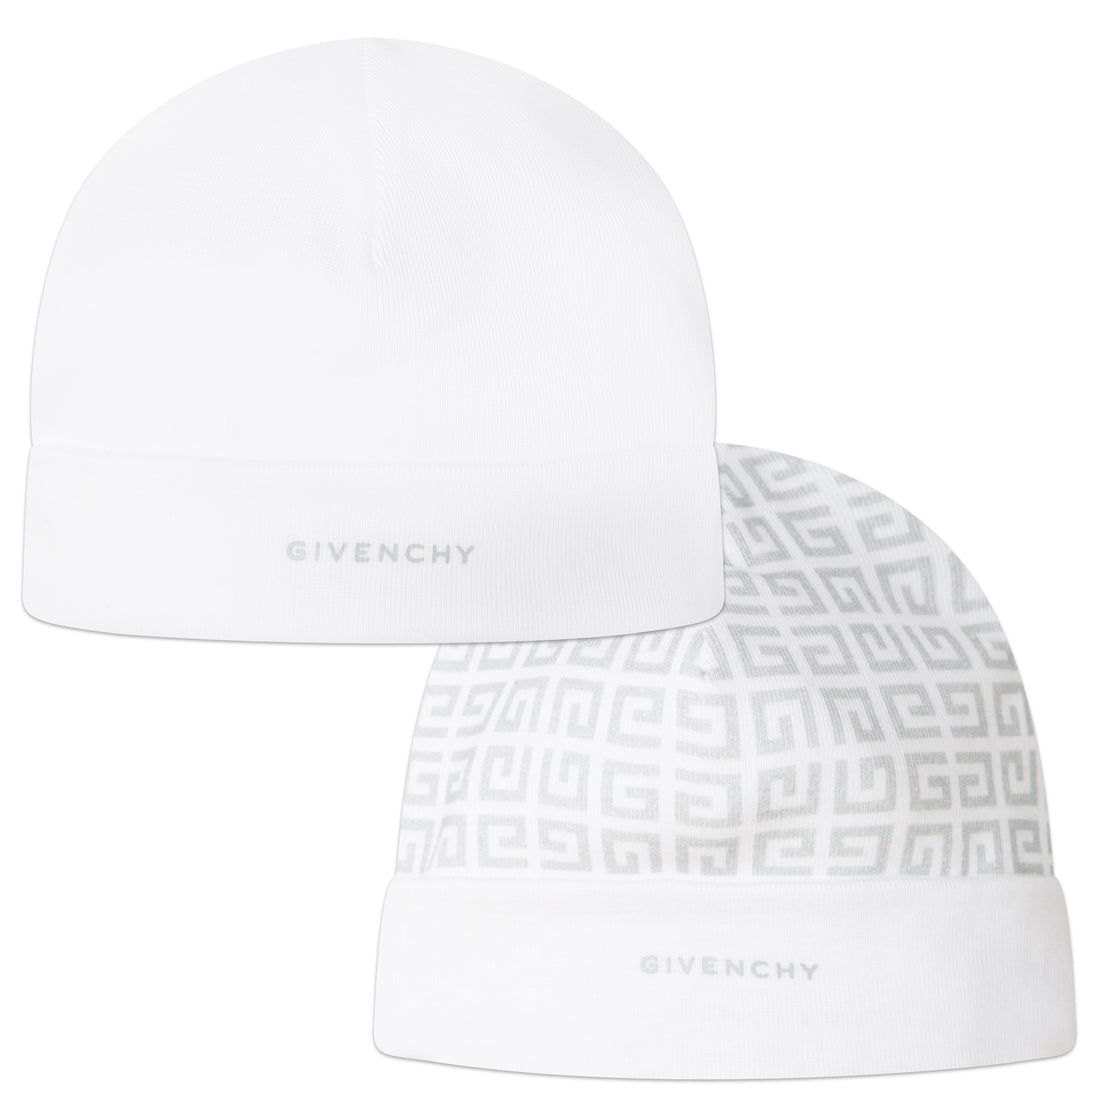 Givenchy Pull On Hat Style: H98171